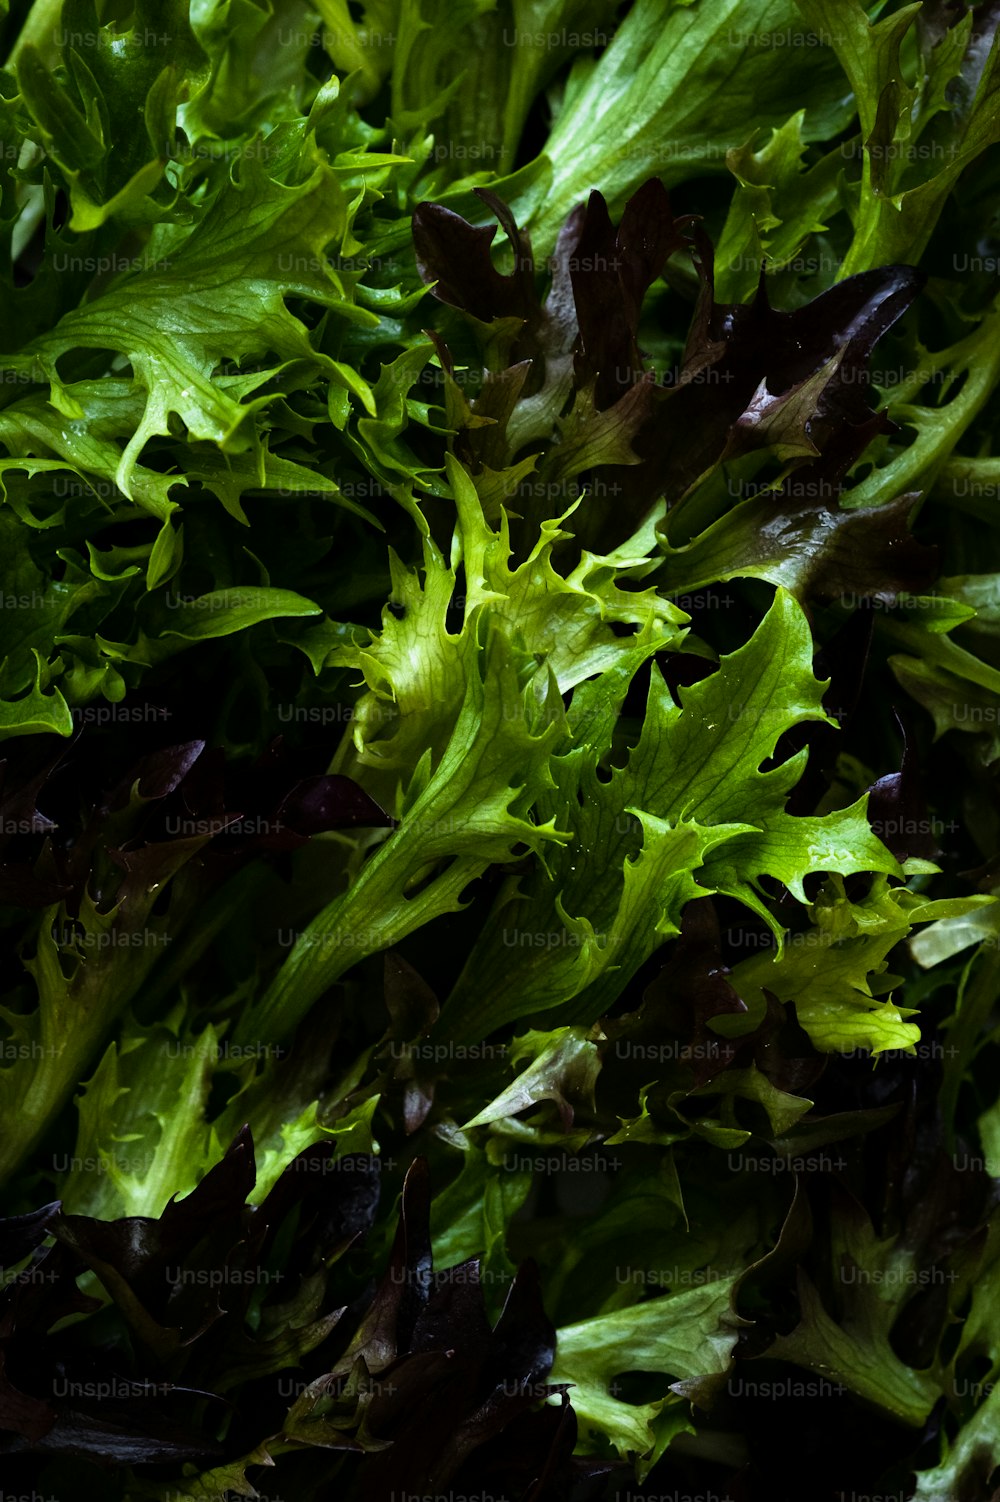 a close up of a bunch of lettuce